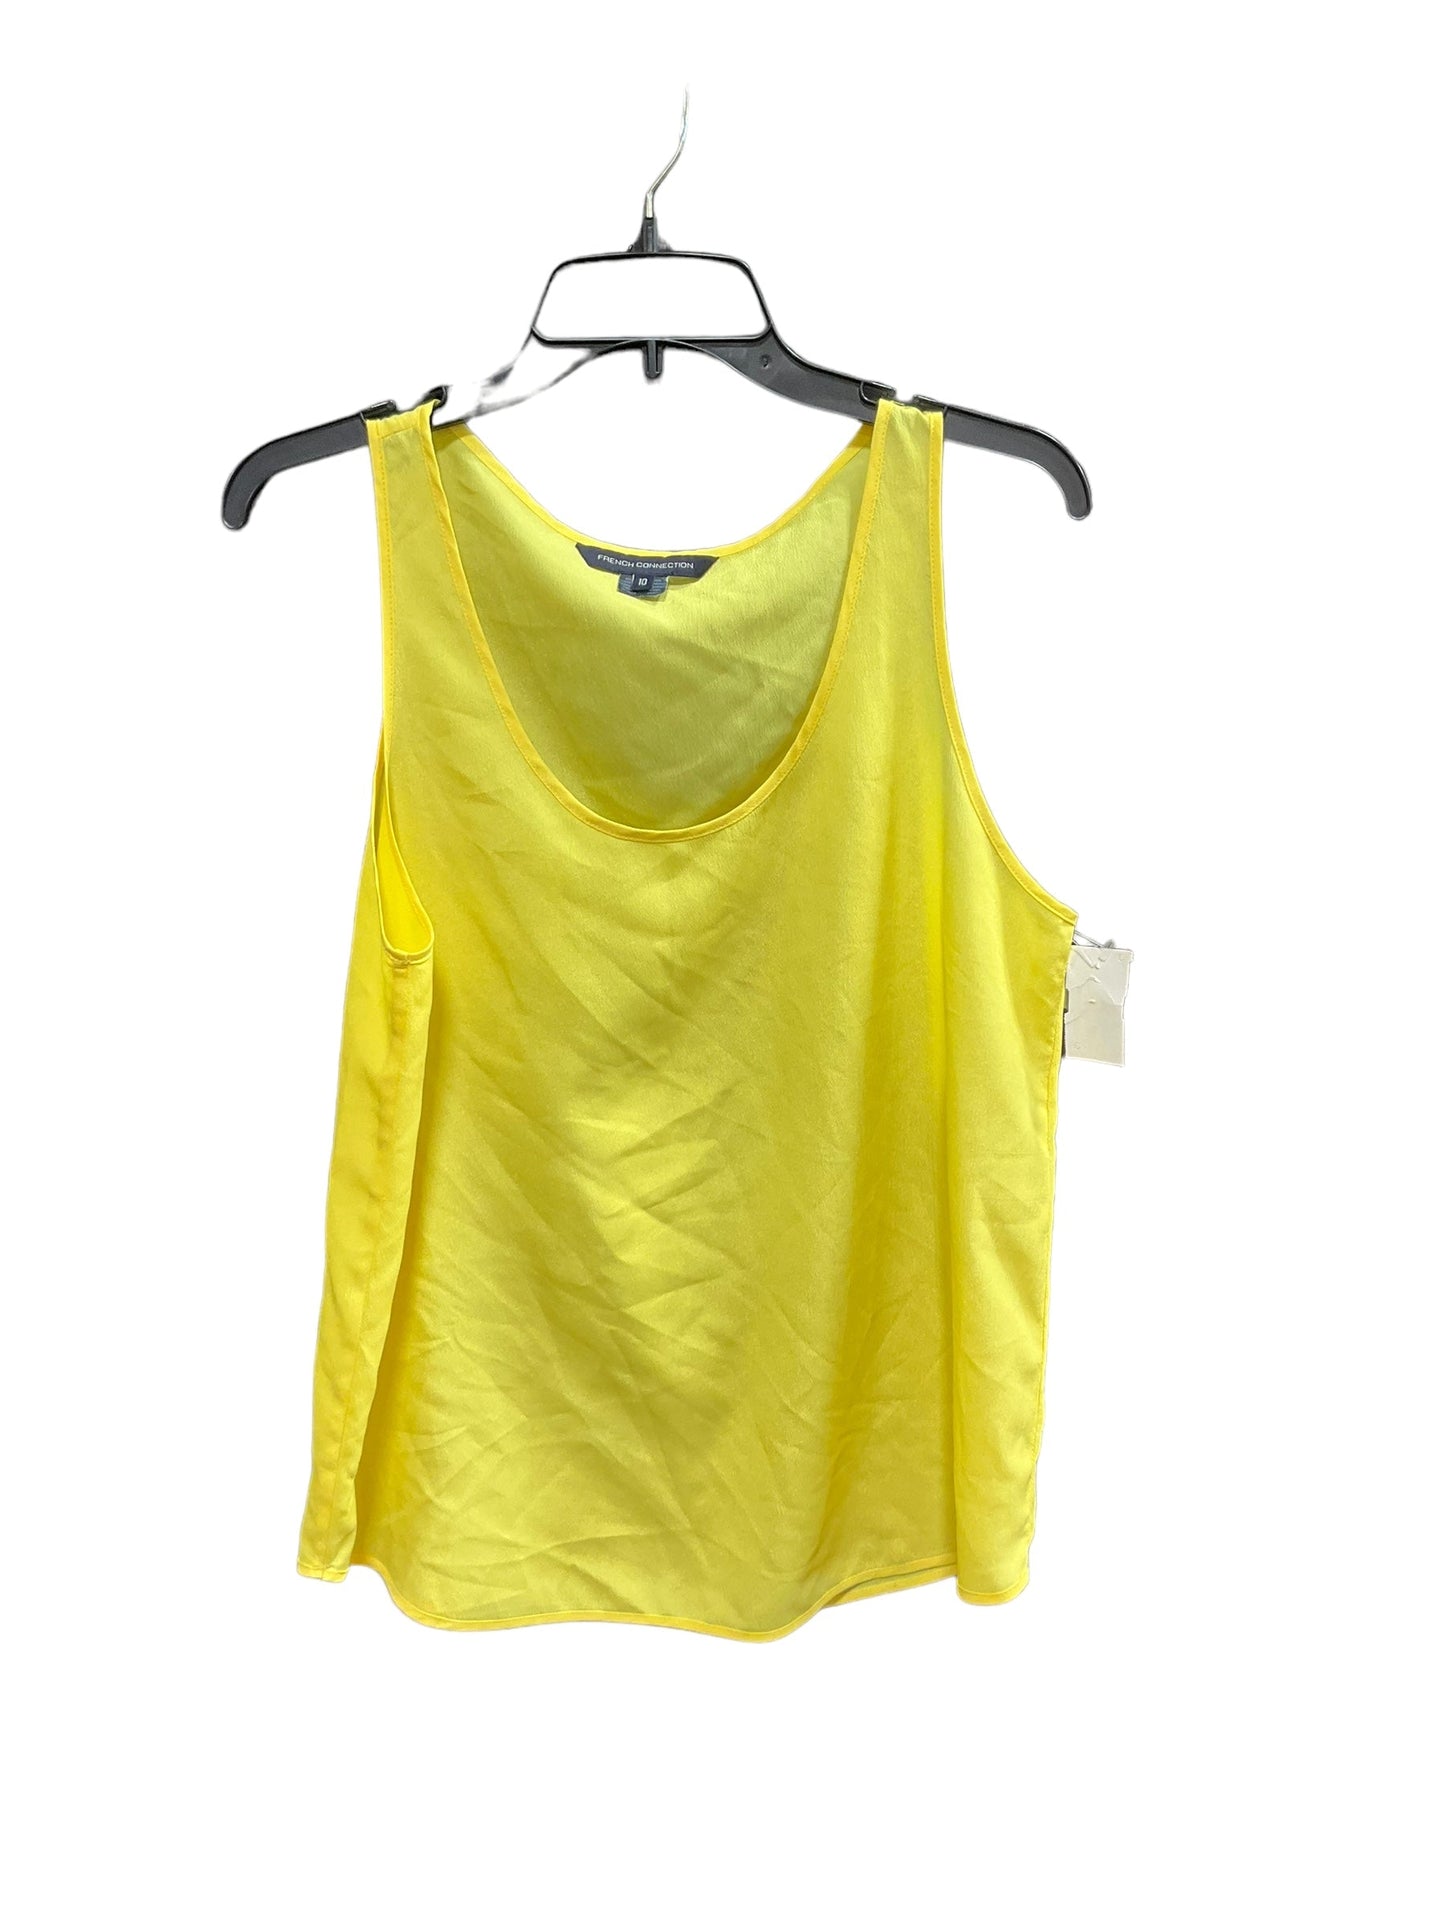 Yellow Top Sleeveless French Connection, Size 10